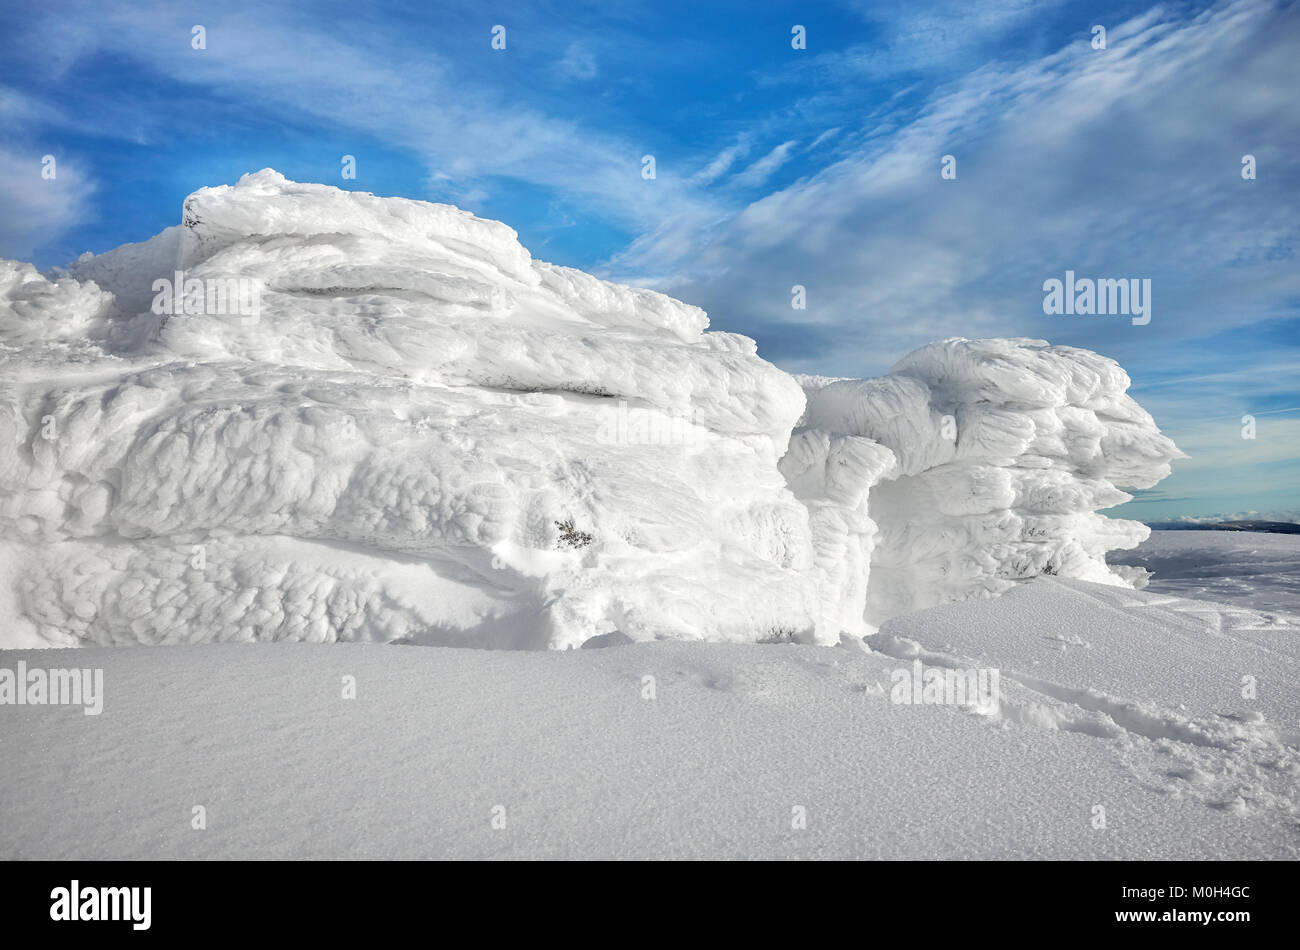 Natural ice formations created by snow and wind, Karkonosze National Park, Poland. Stock Photo